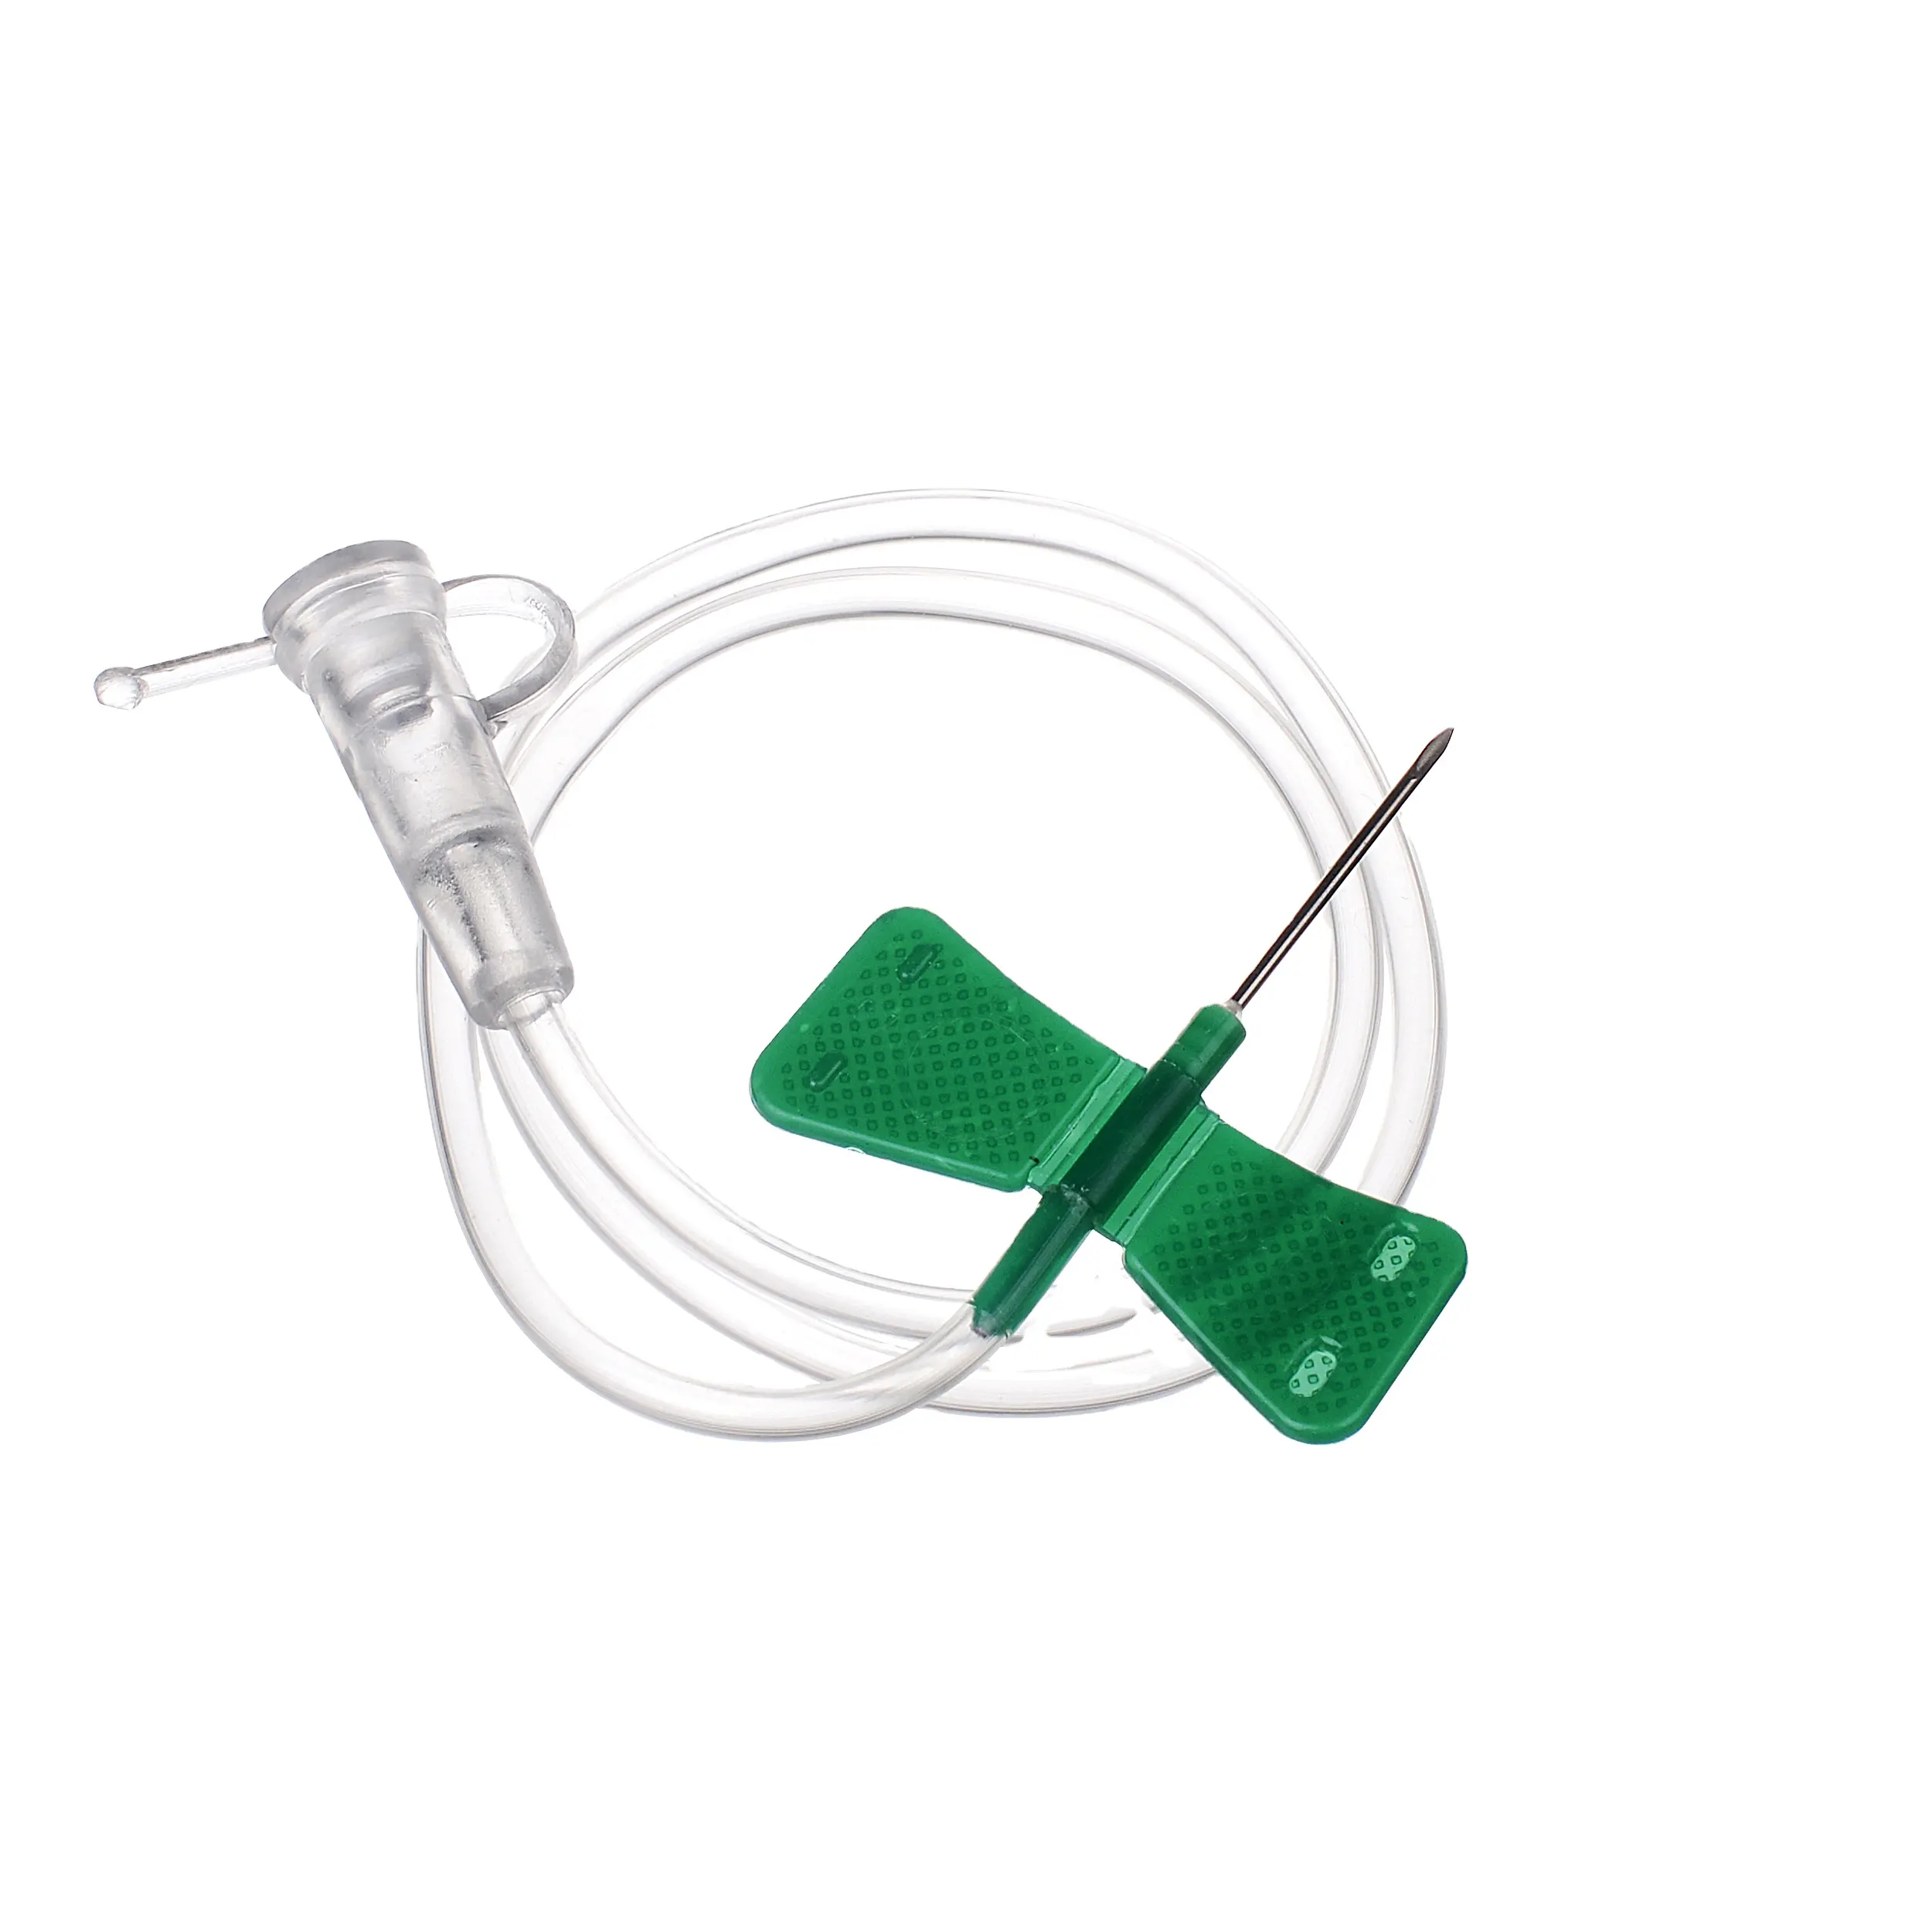 Sterilized Wholesale Popular Size 21g Luer Slip 24g Blood Collection Scalp Vein Set With Butterfly Needle